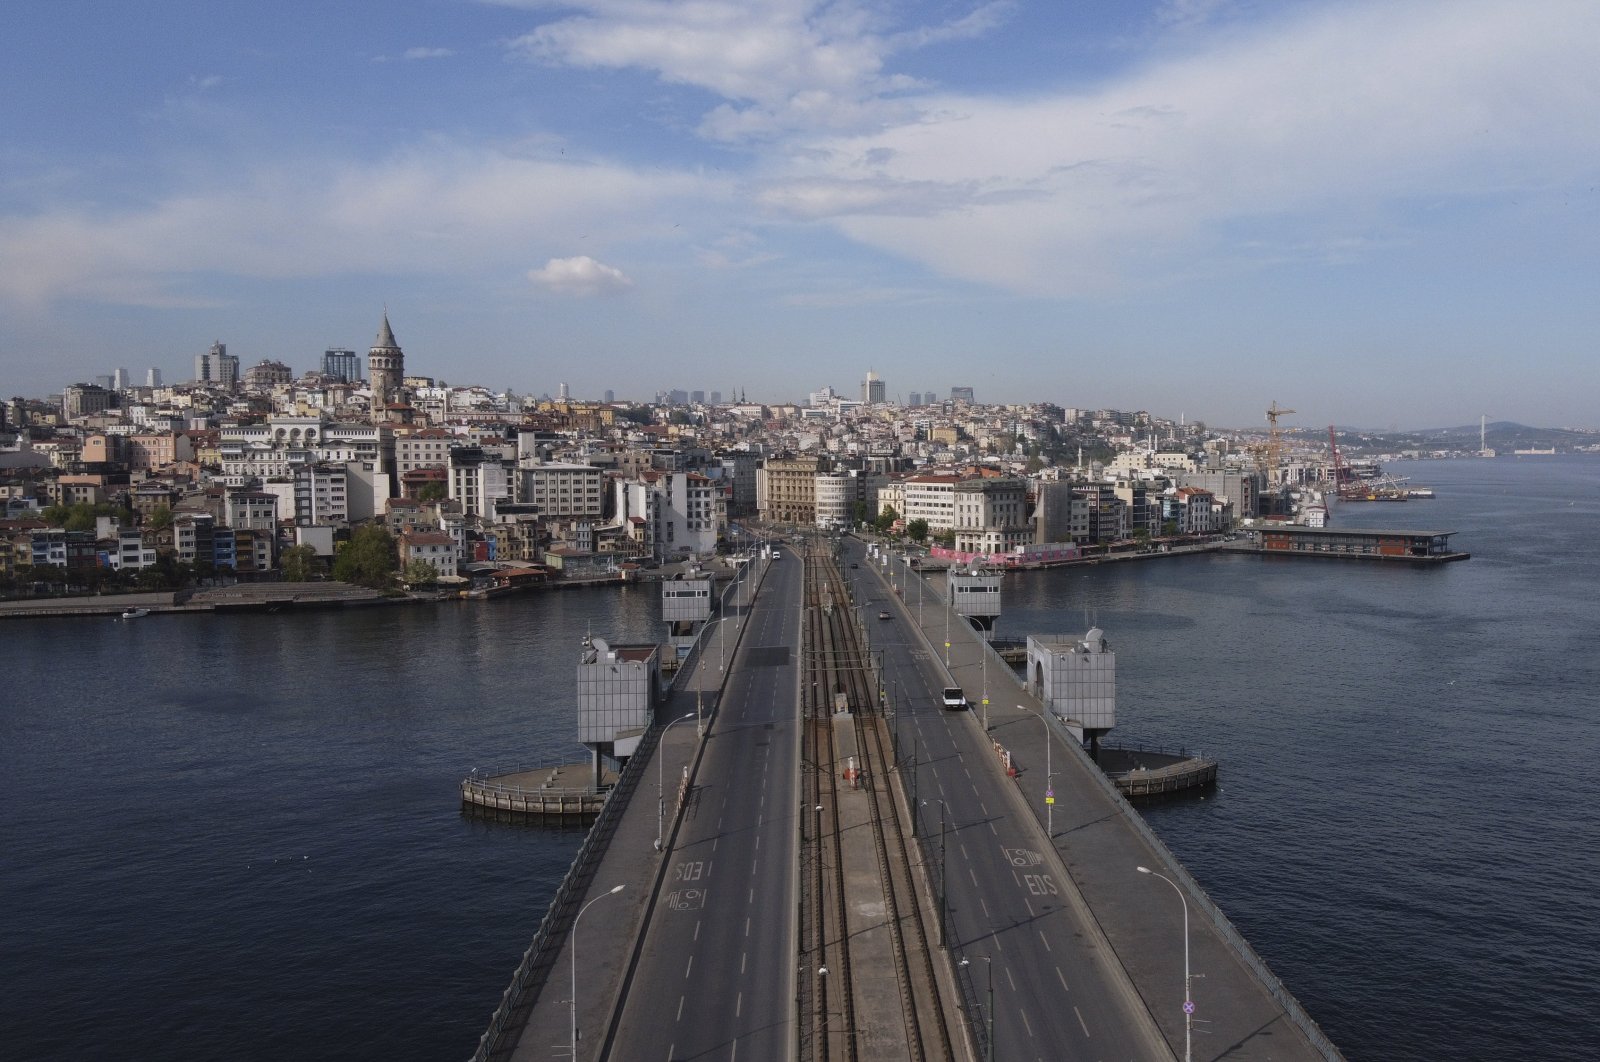 An aerial view of Galata Bridge, deserted due to the coronavirus lockdown, over the Golden Horn leading to the Bosporus, right, separates Asia and Europe in Istanbul, Turkey, May 1, 2020. (AP Photo)